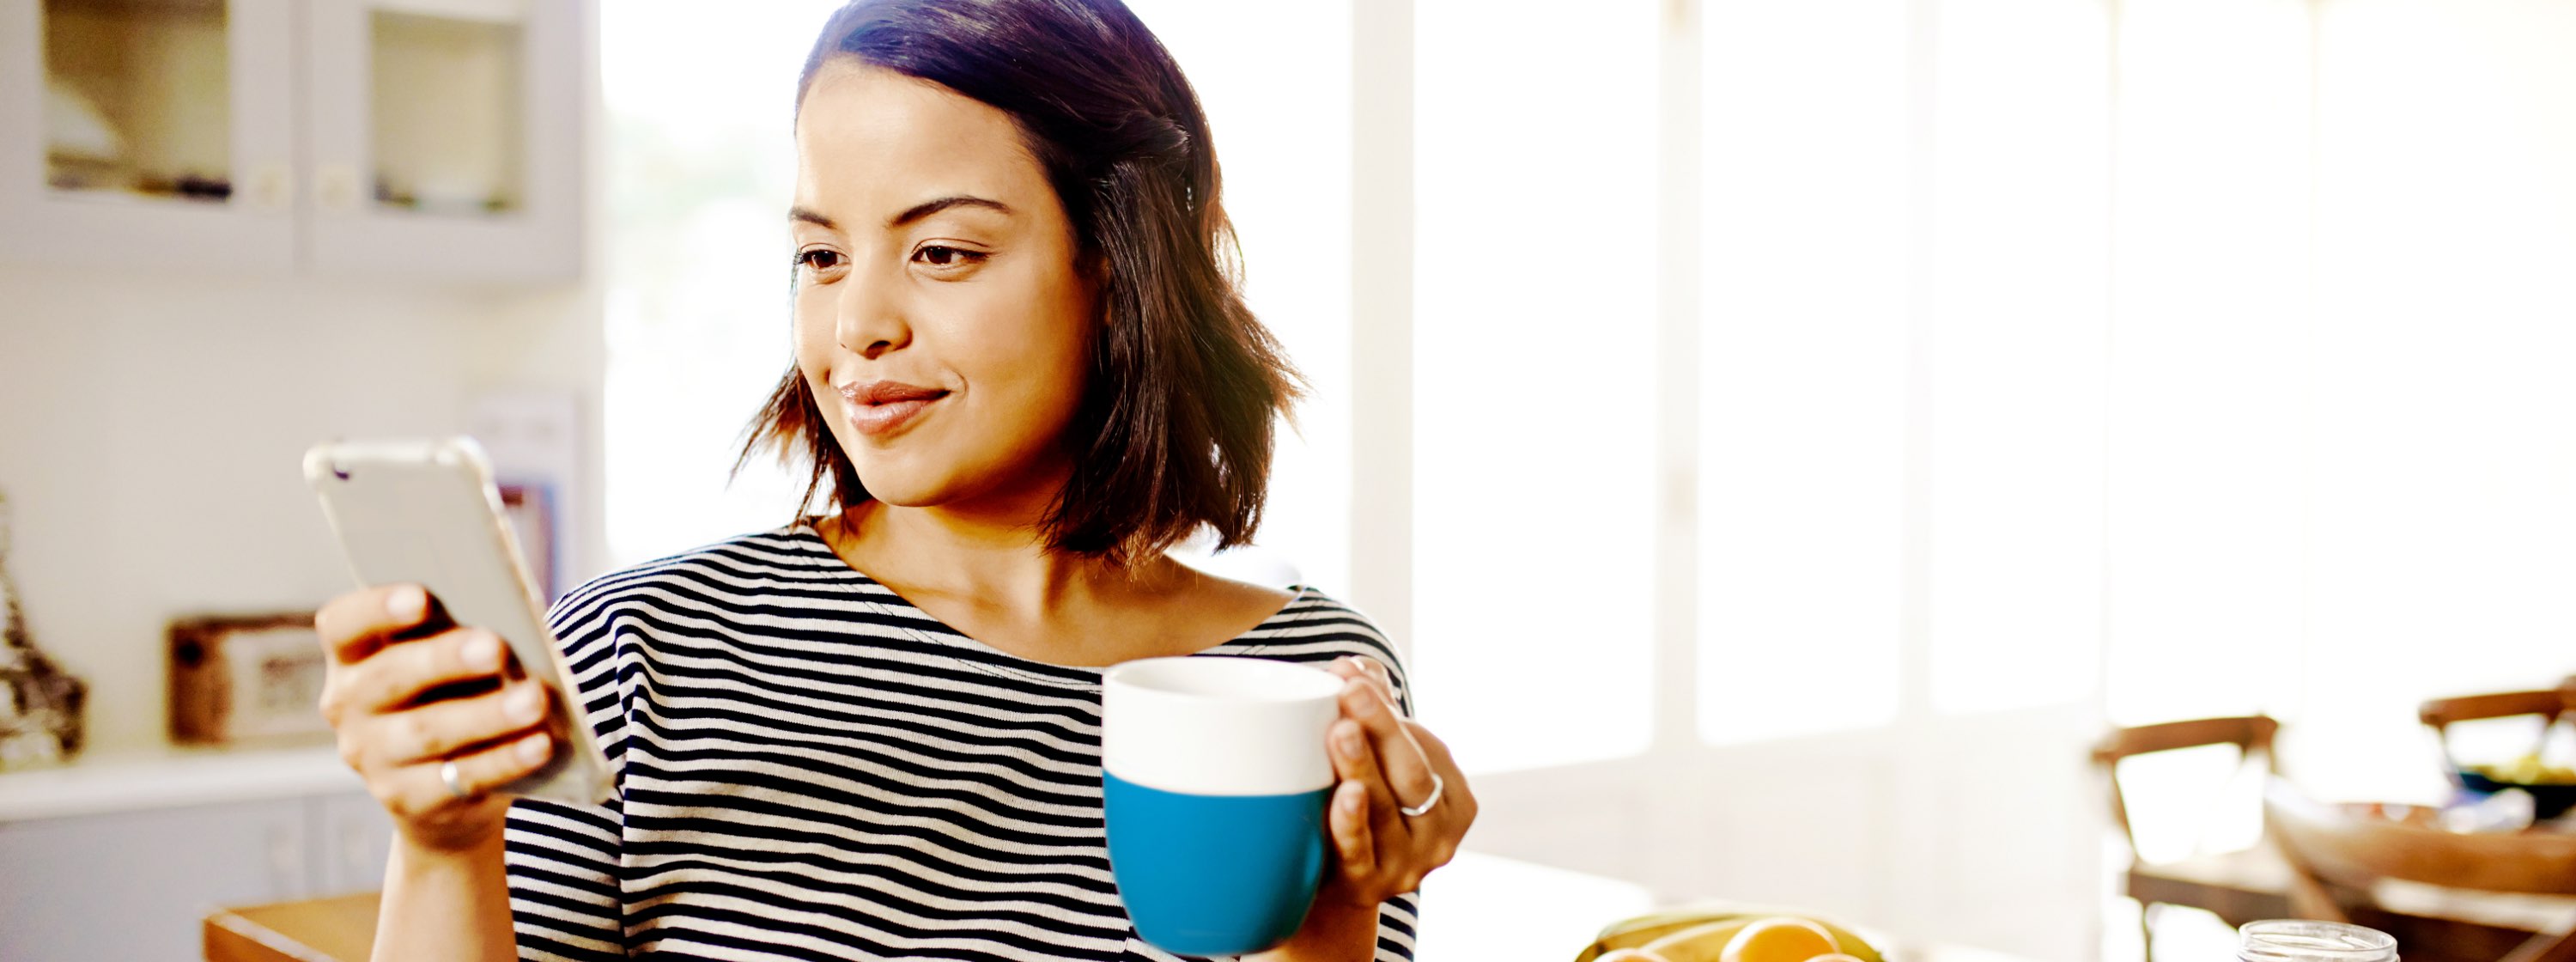 Smiling young woman, looking at her phone and holding coffee